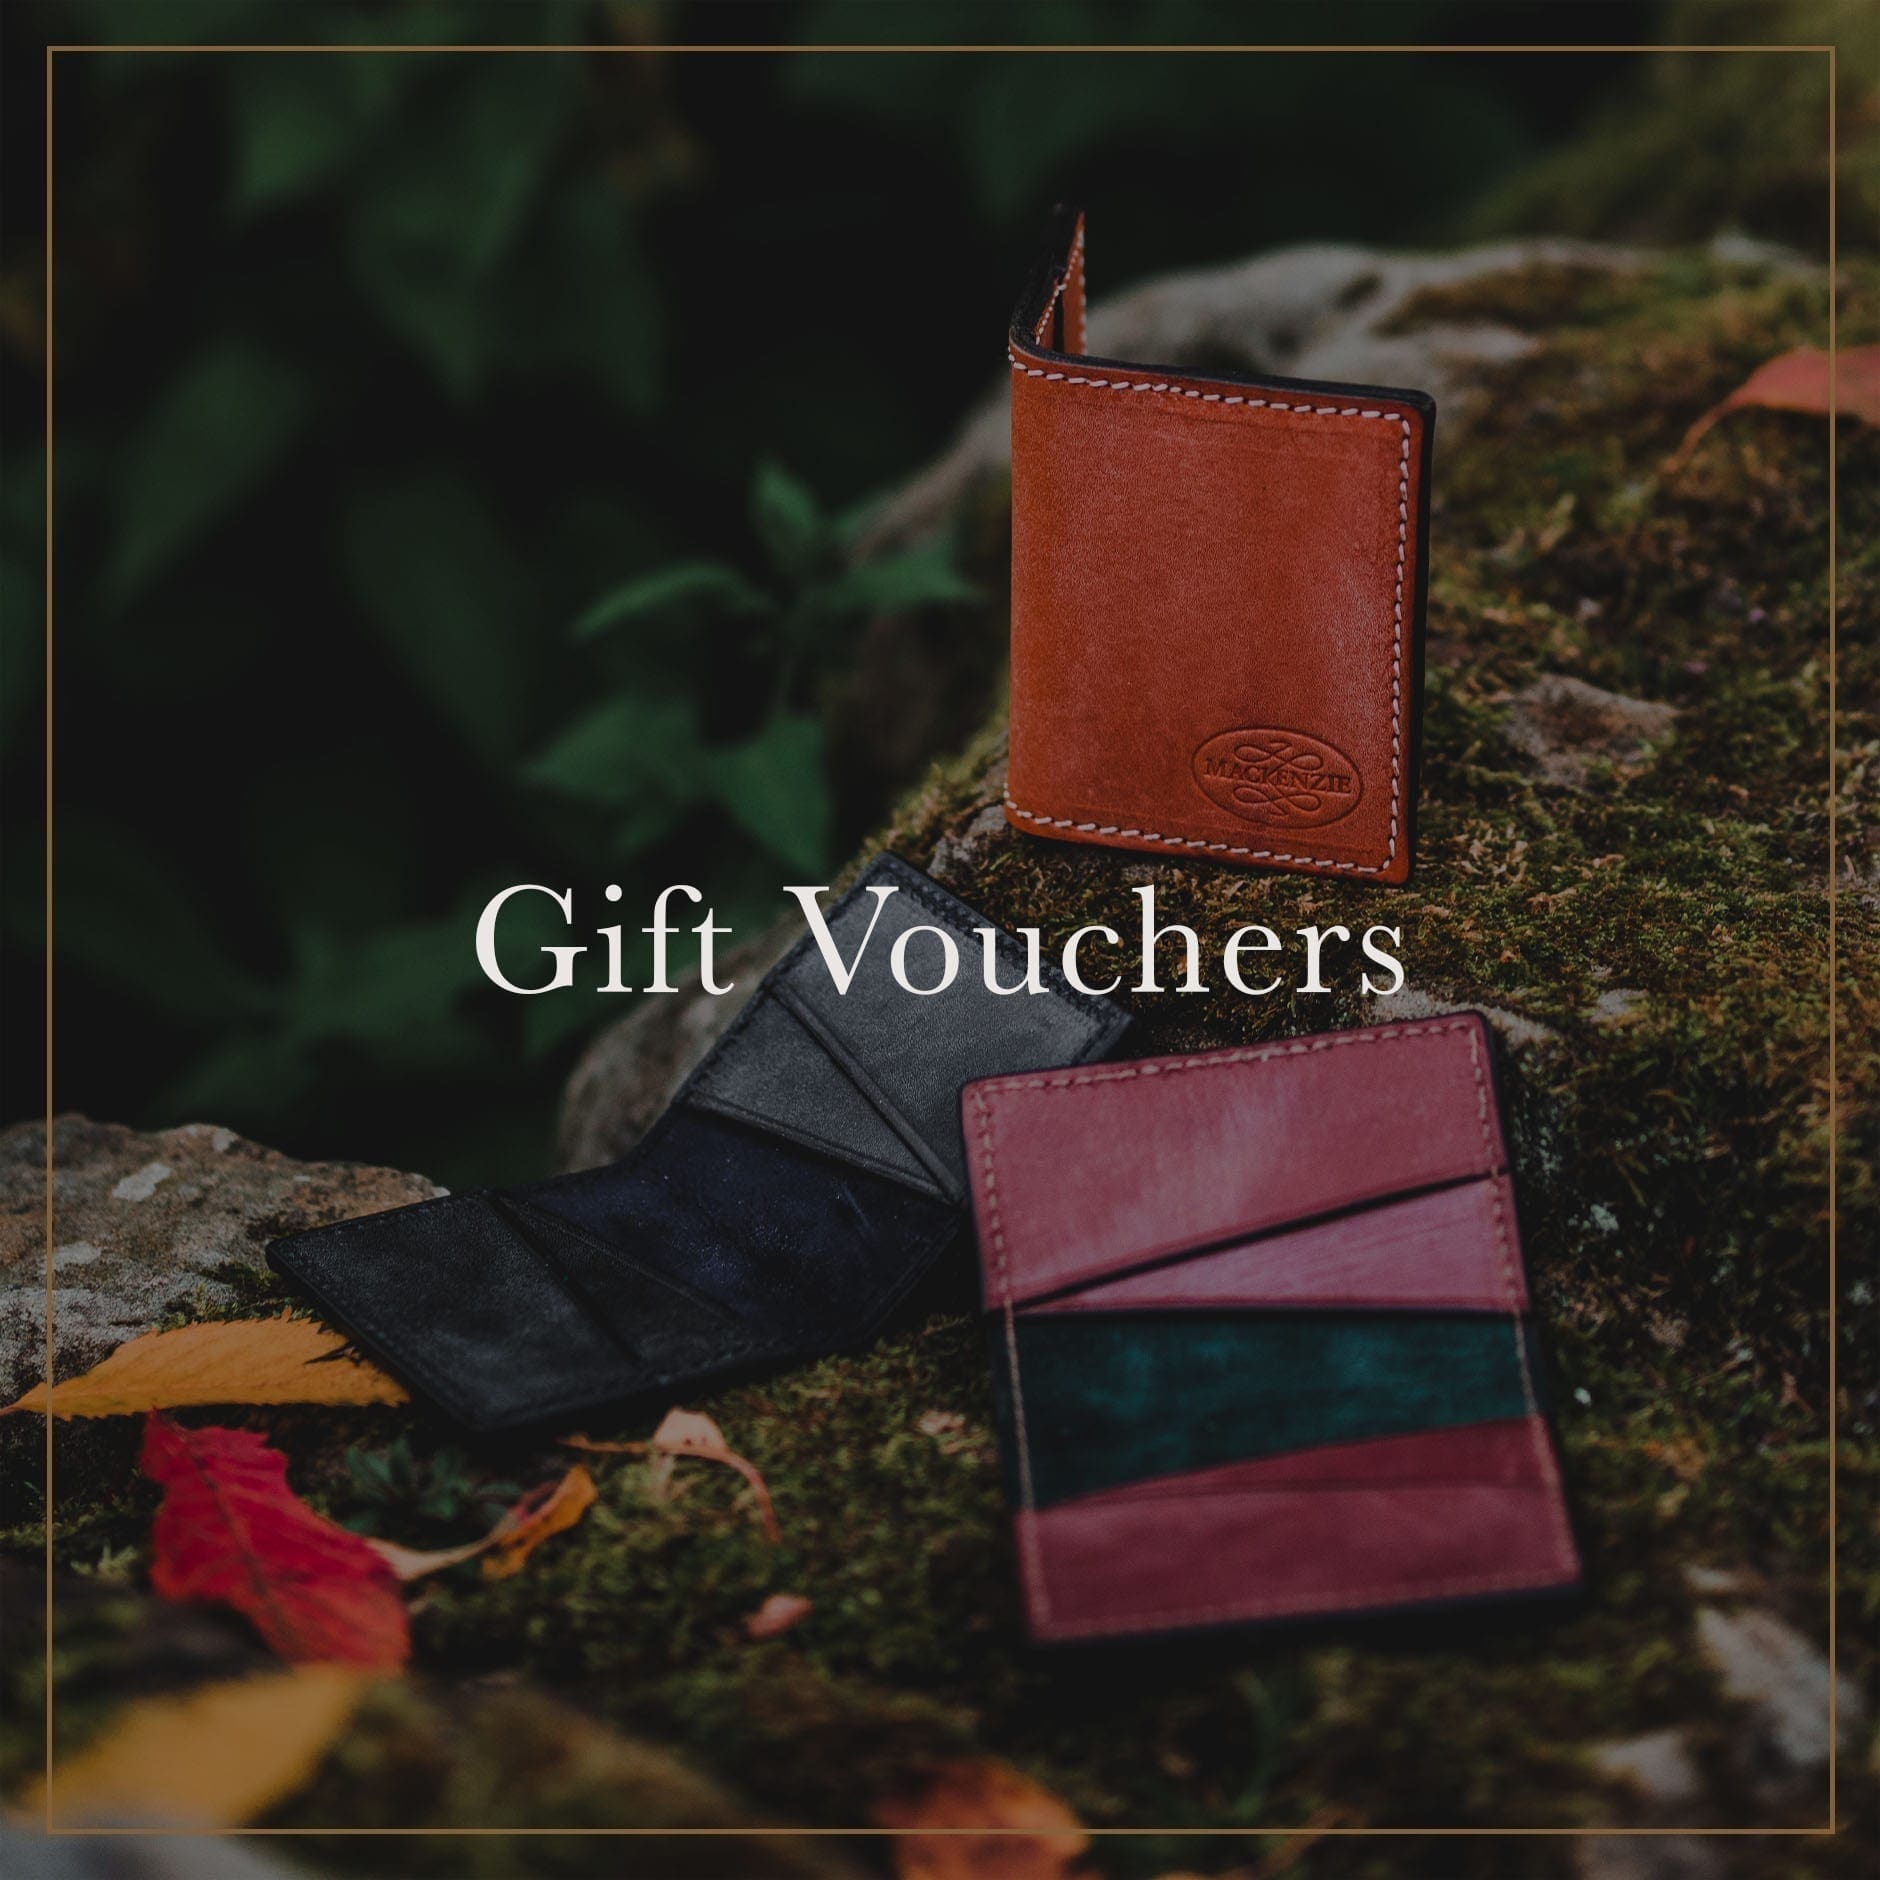 Gift Vouchers scaled